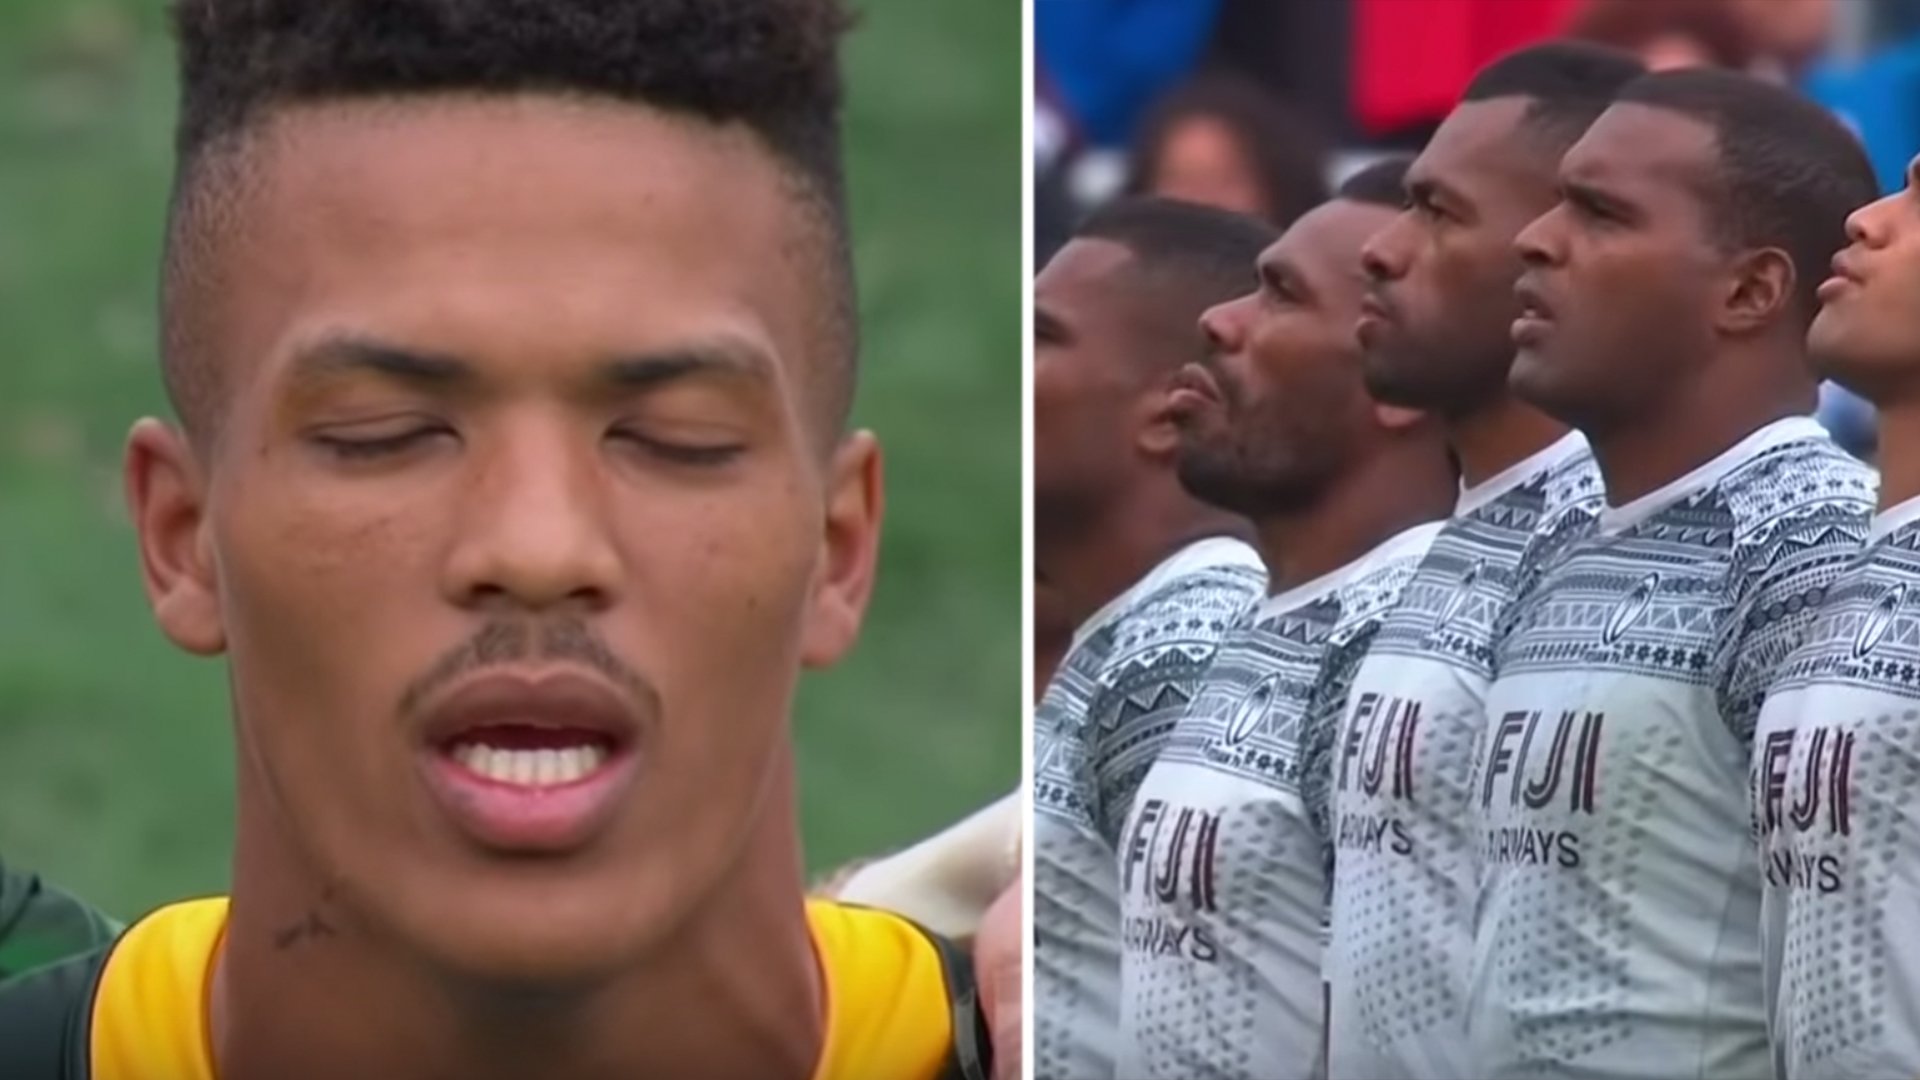 The greatest Sevens match possibly ever was played this weekend